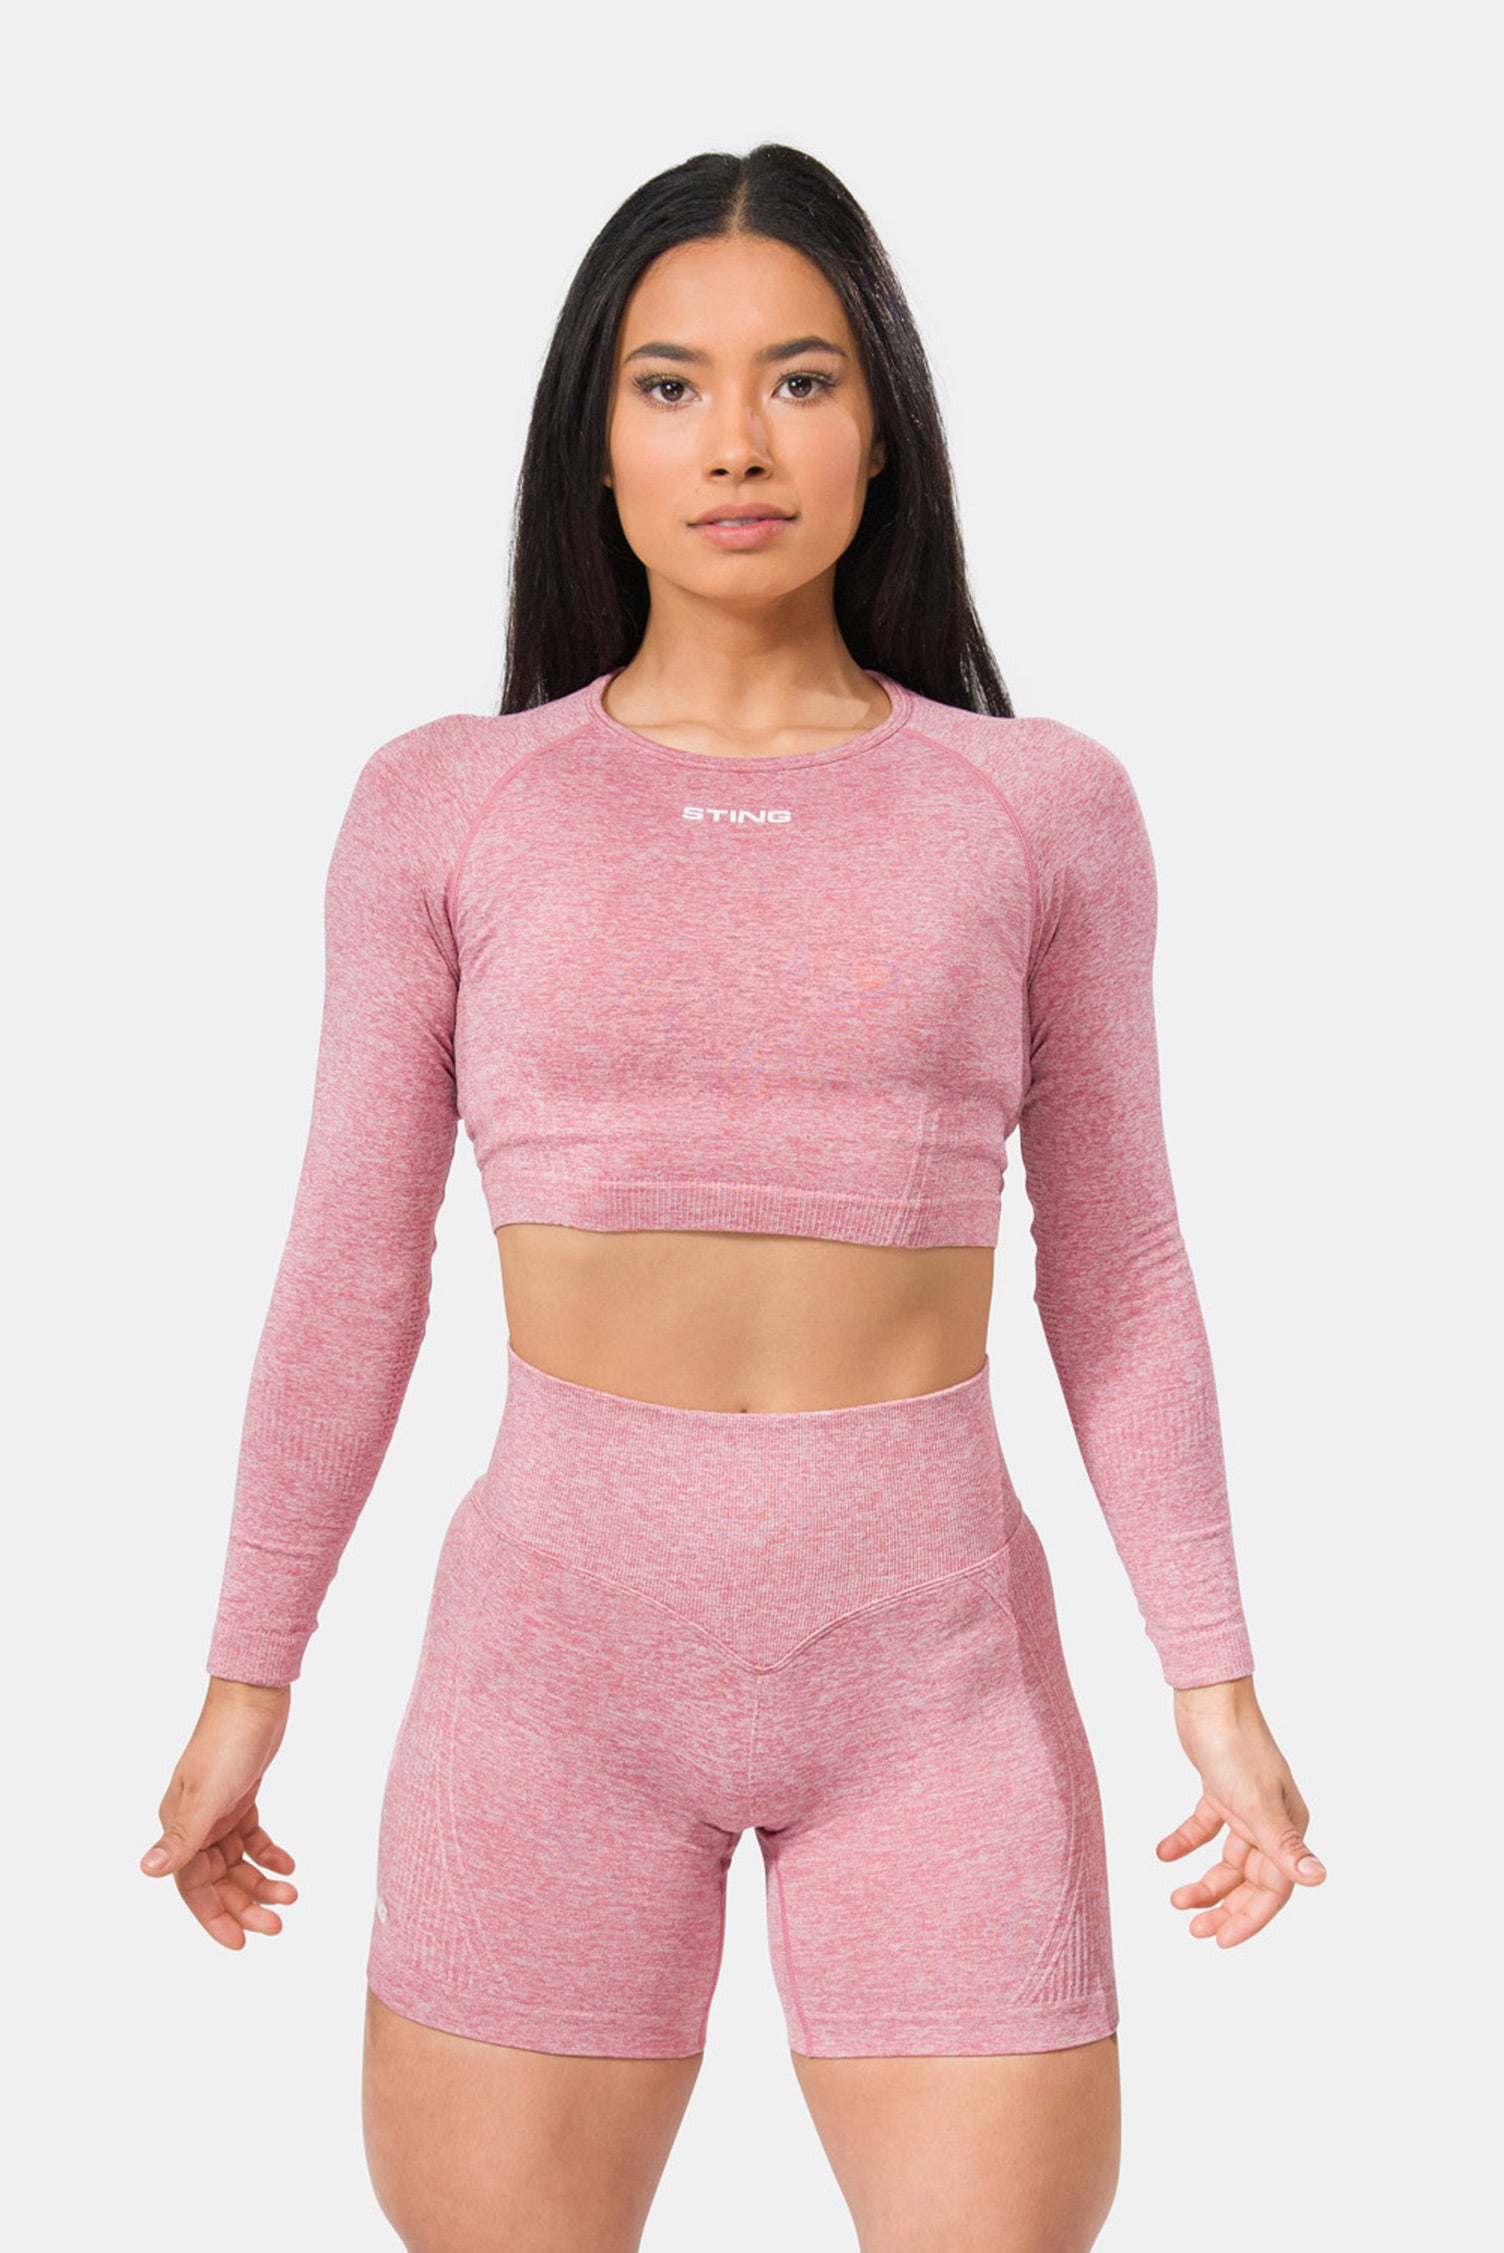 STING Allure Seamless Long Sleeve-Pink Marle – STING Australiaᵀᴹ